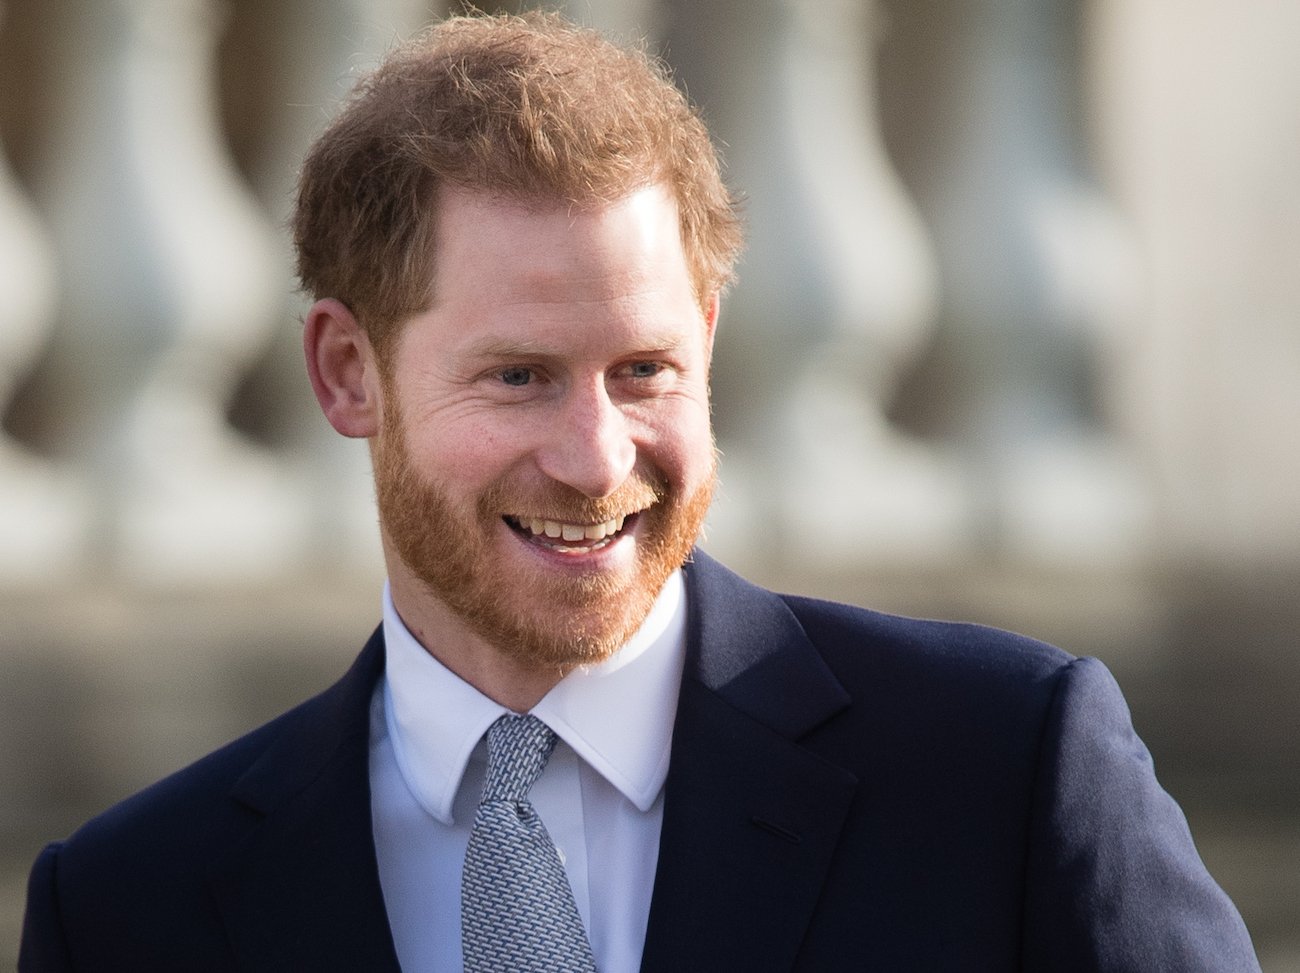 Prince Harry wearing a suit and smiling while looking toward the right side of the photo